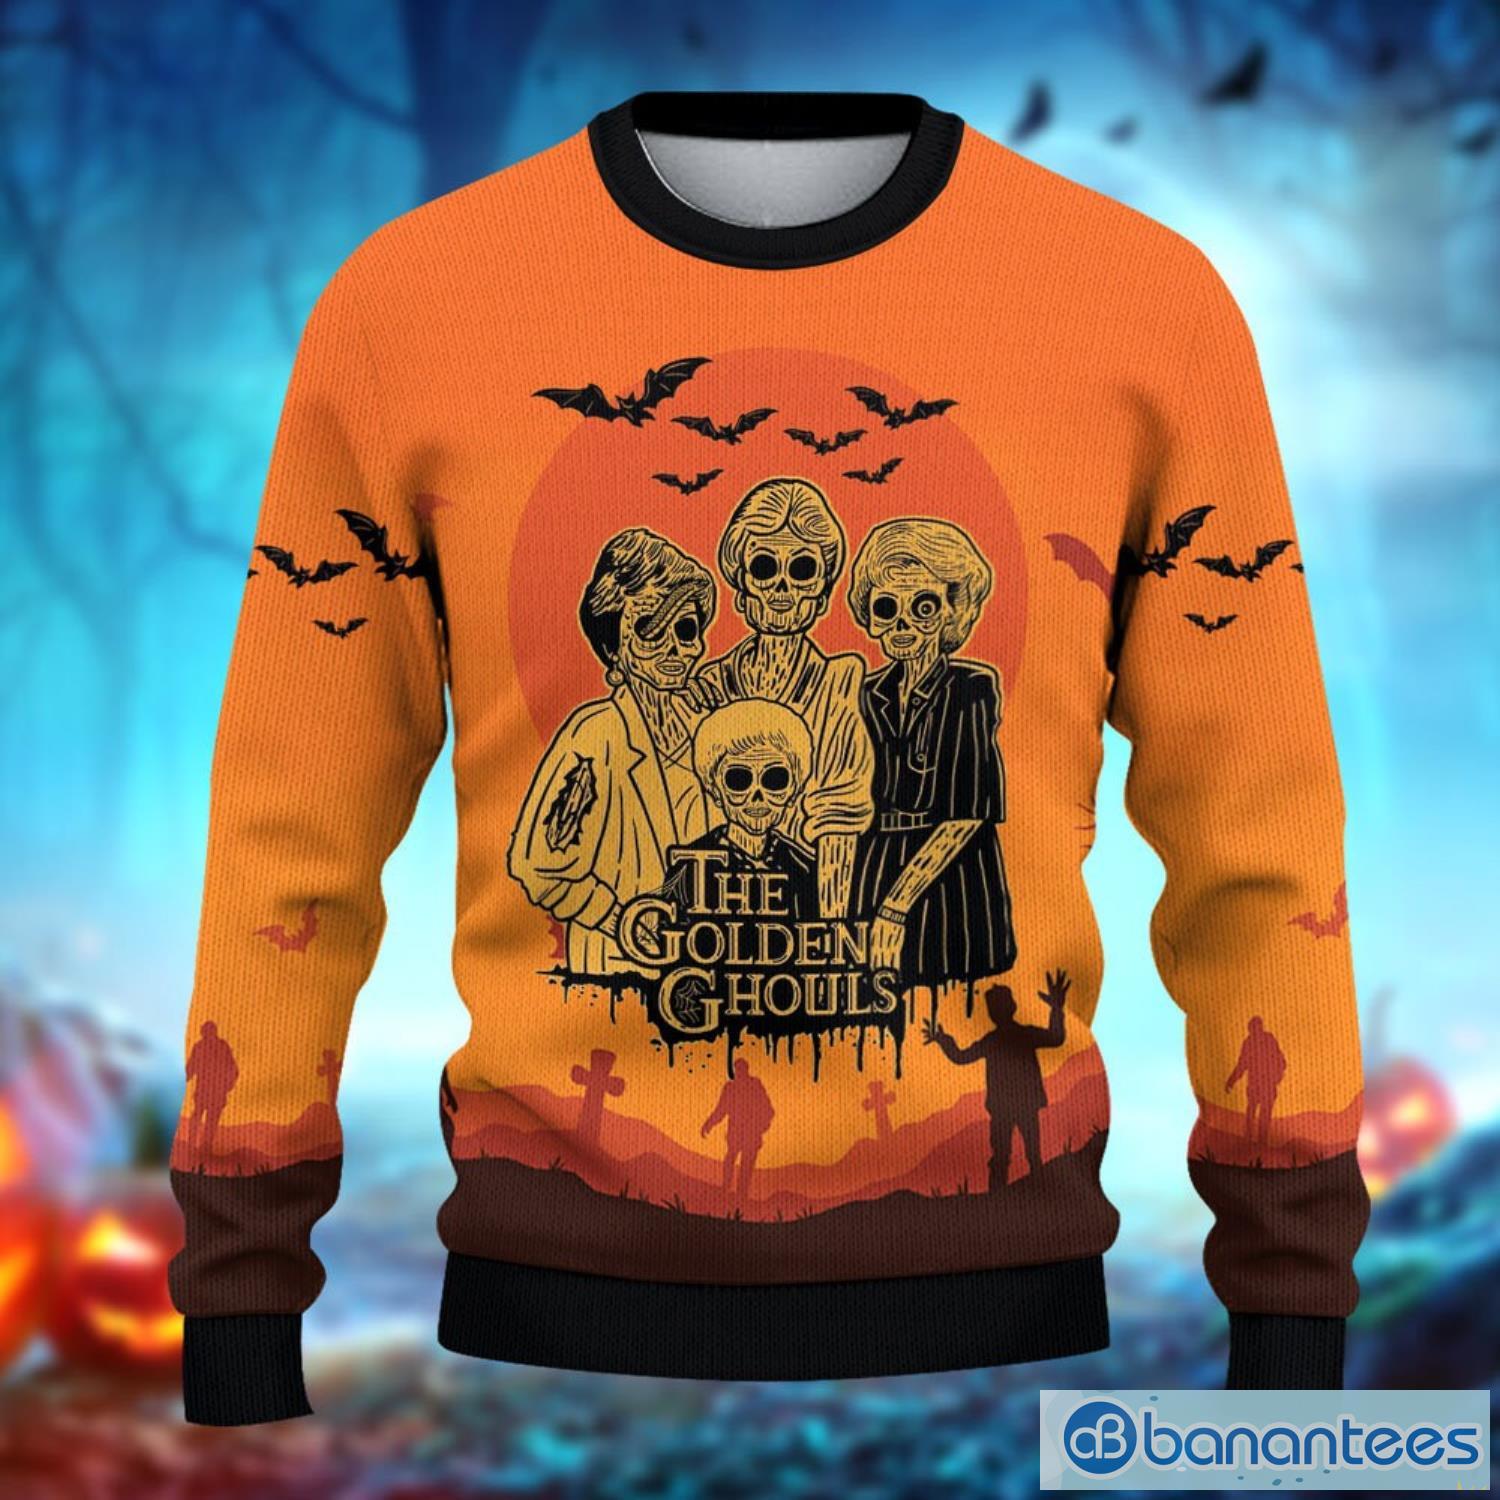 The Golden Ghouls Golden Girls Christmas Ugly Christmas Sweater The Golden Girls Halloween Product Photo 2